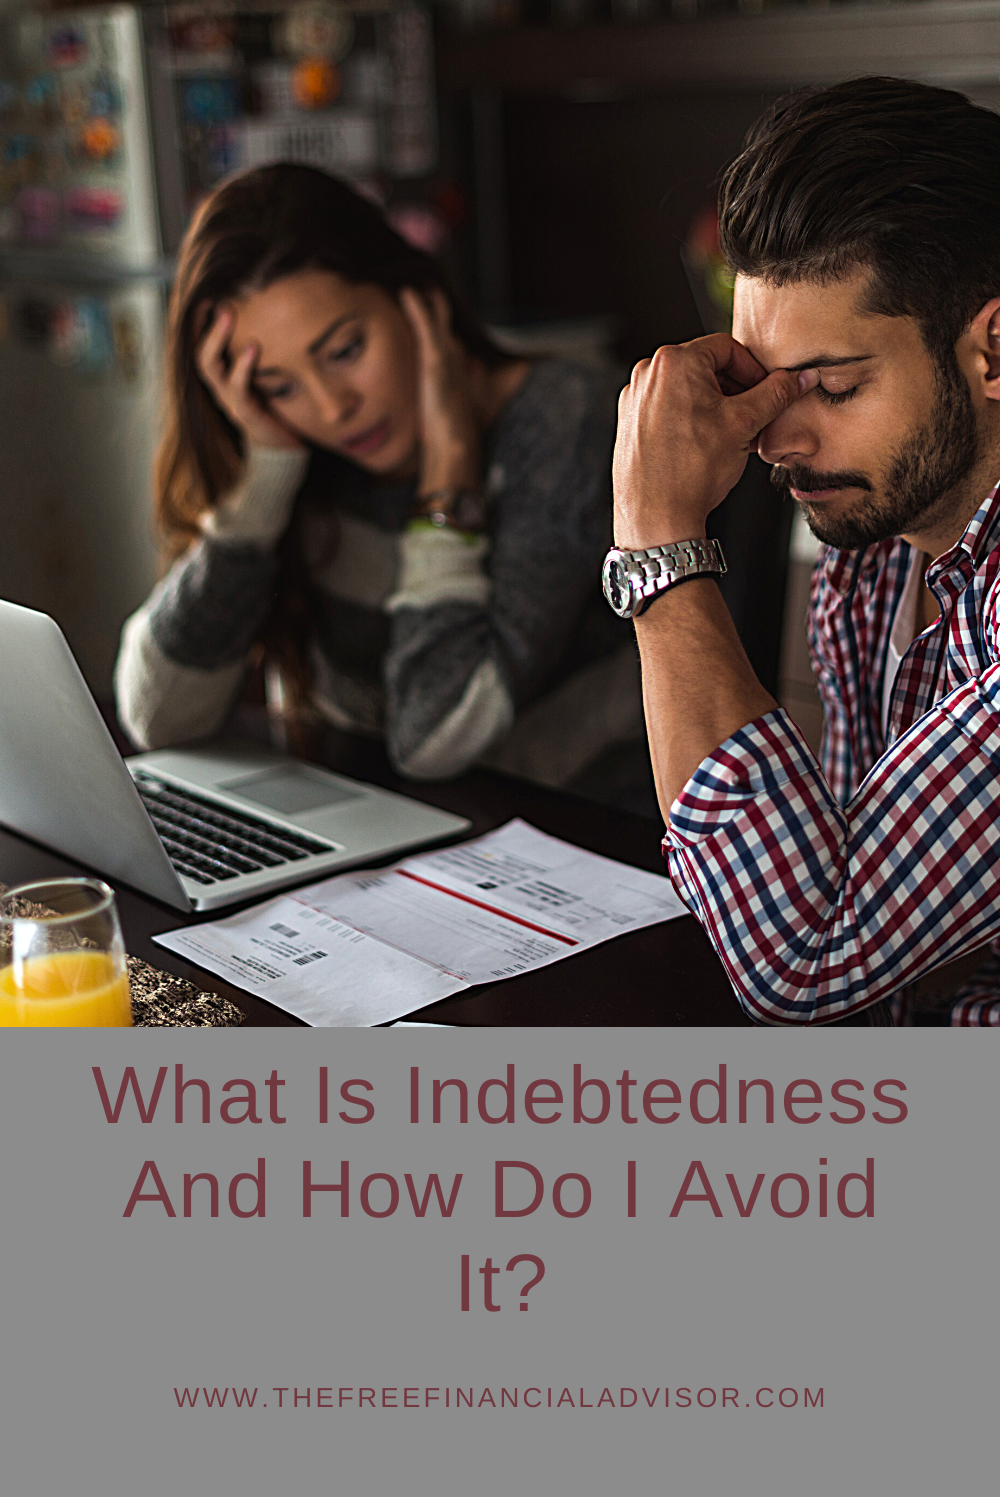 What Is Indebtedness And How Do I Avoid It